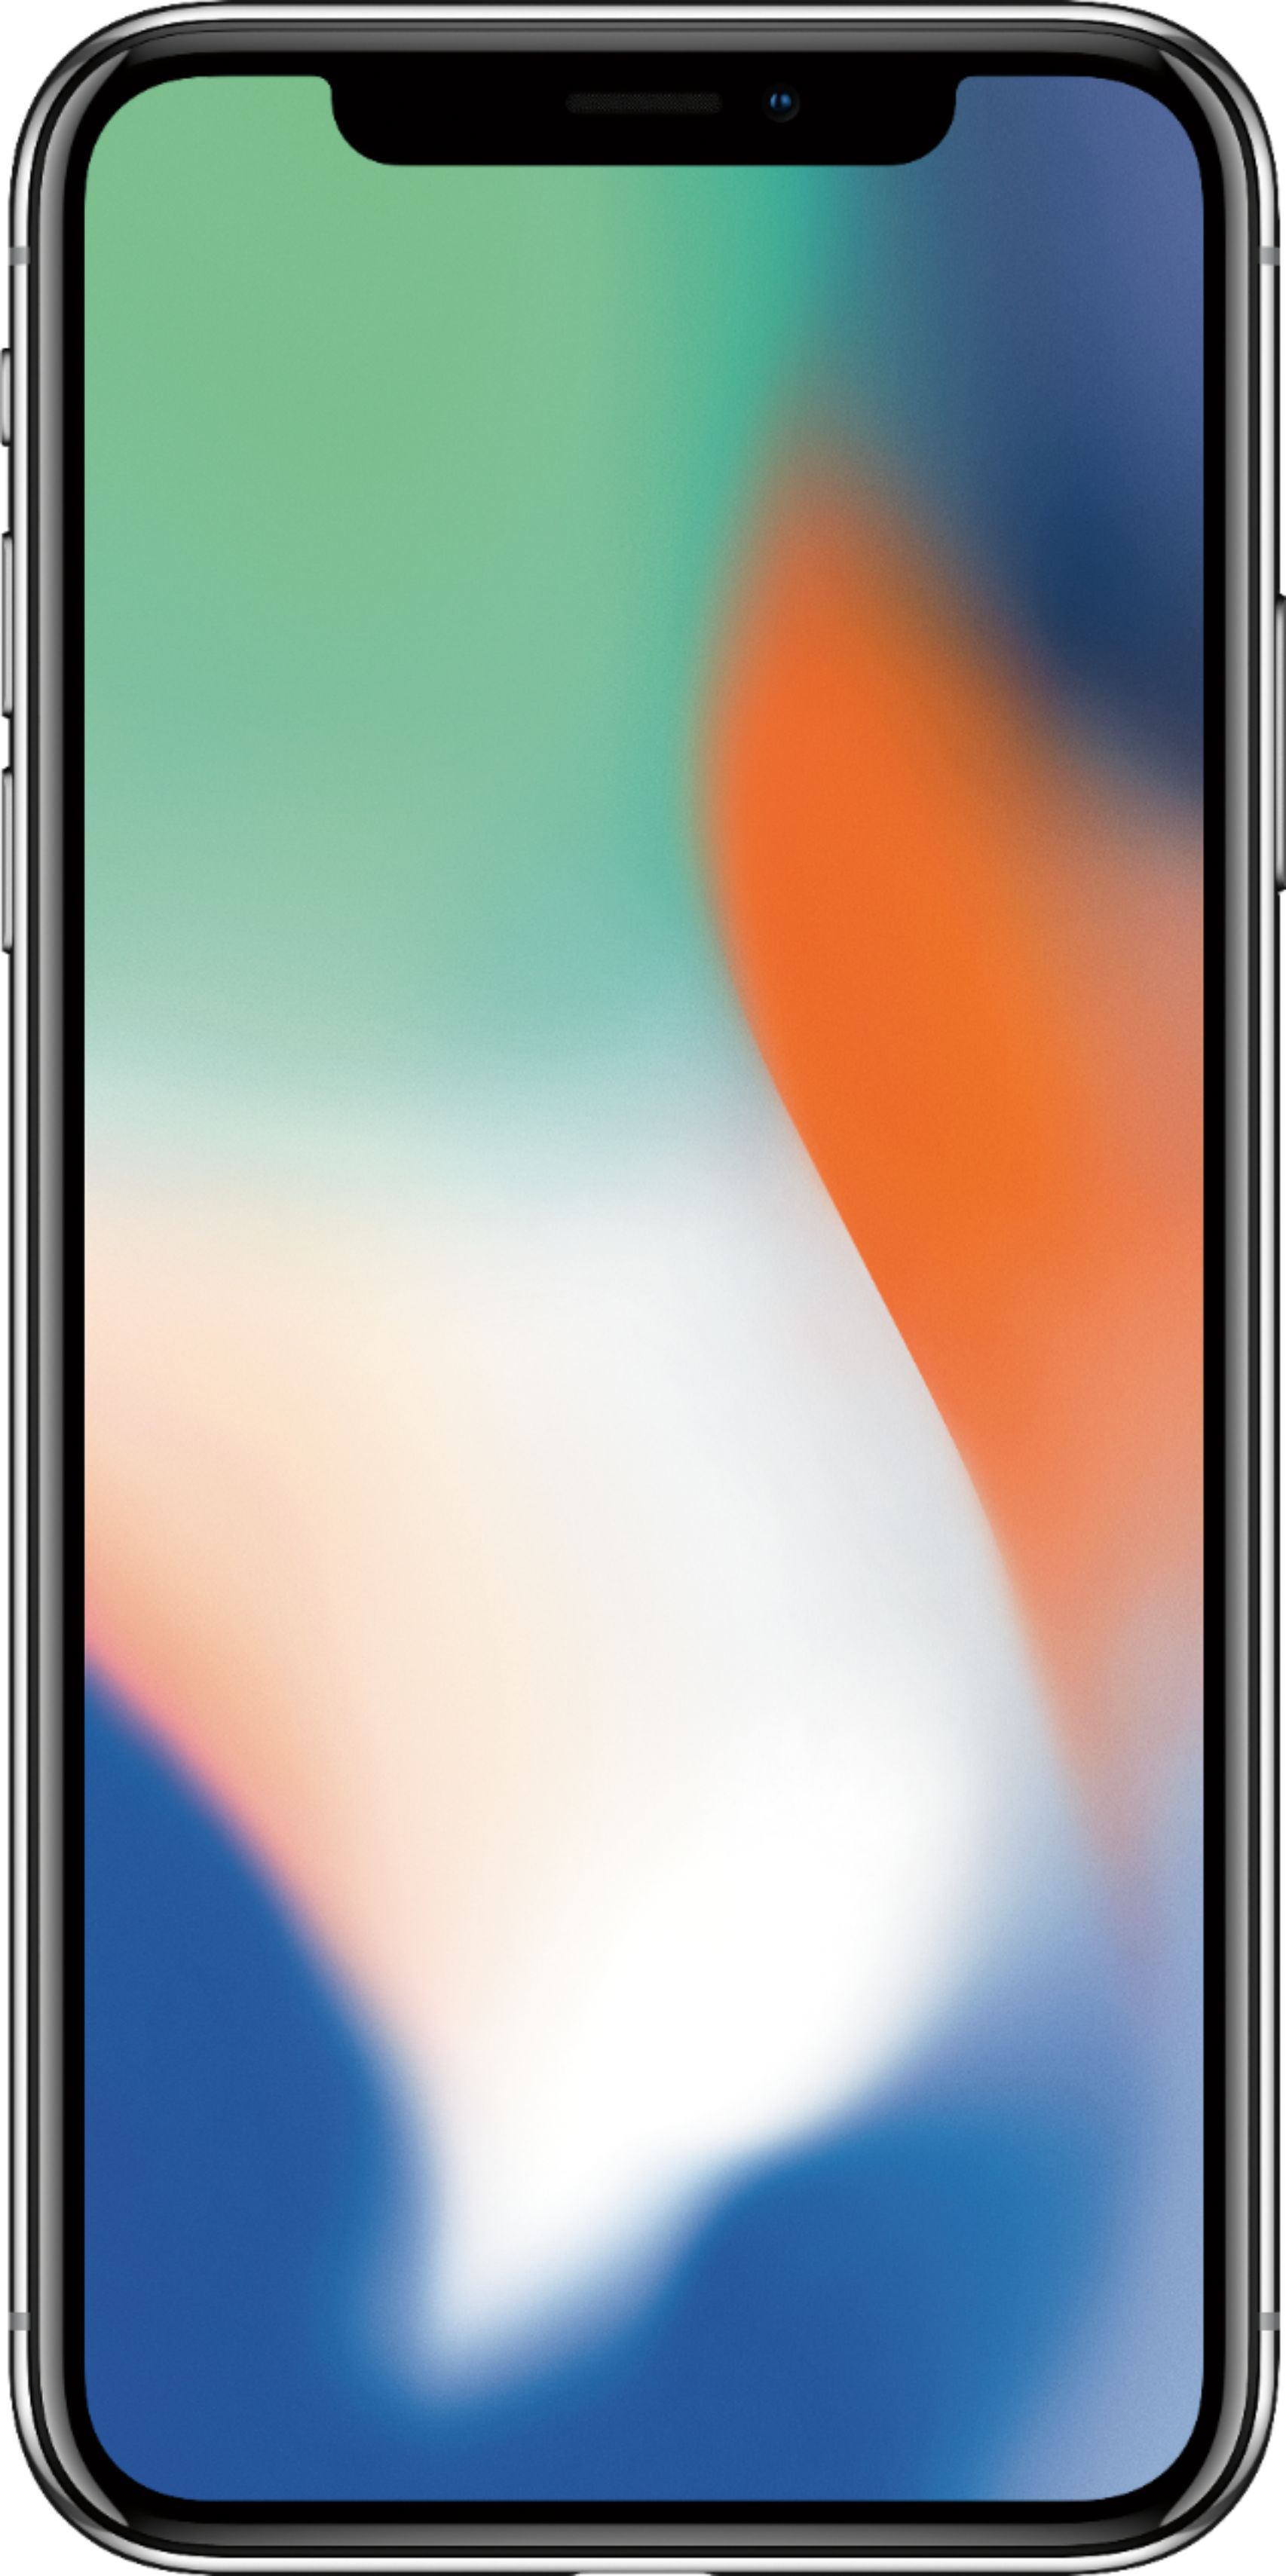 Apple iPhone X - Airplane Mode - AT&T